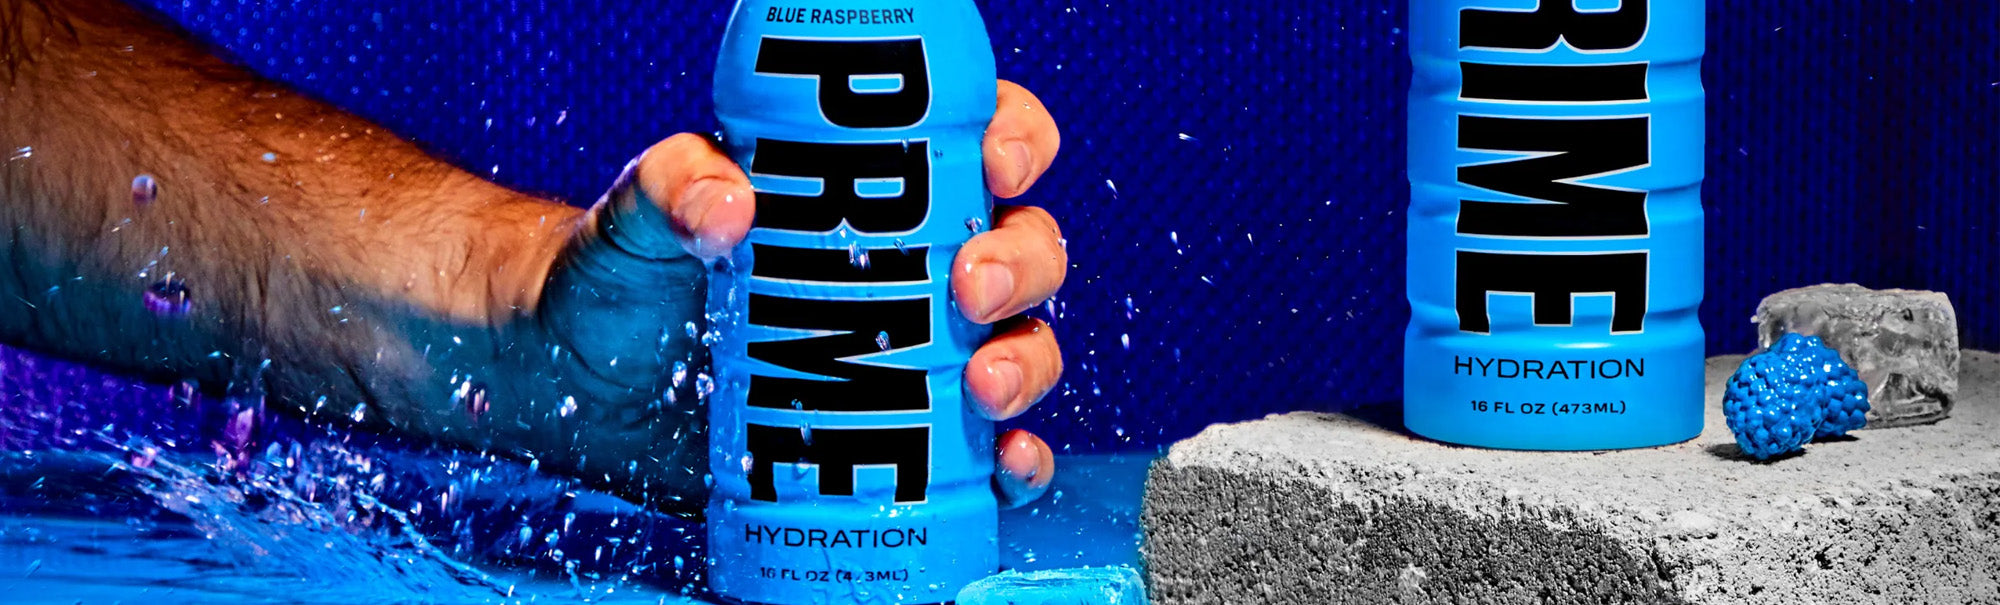 Prime-Hydration-Drink The Bottle Club